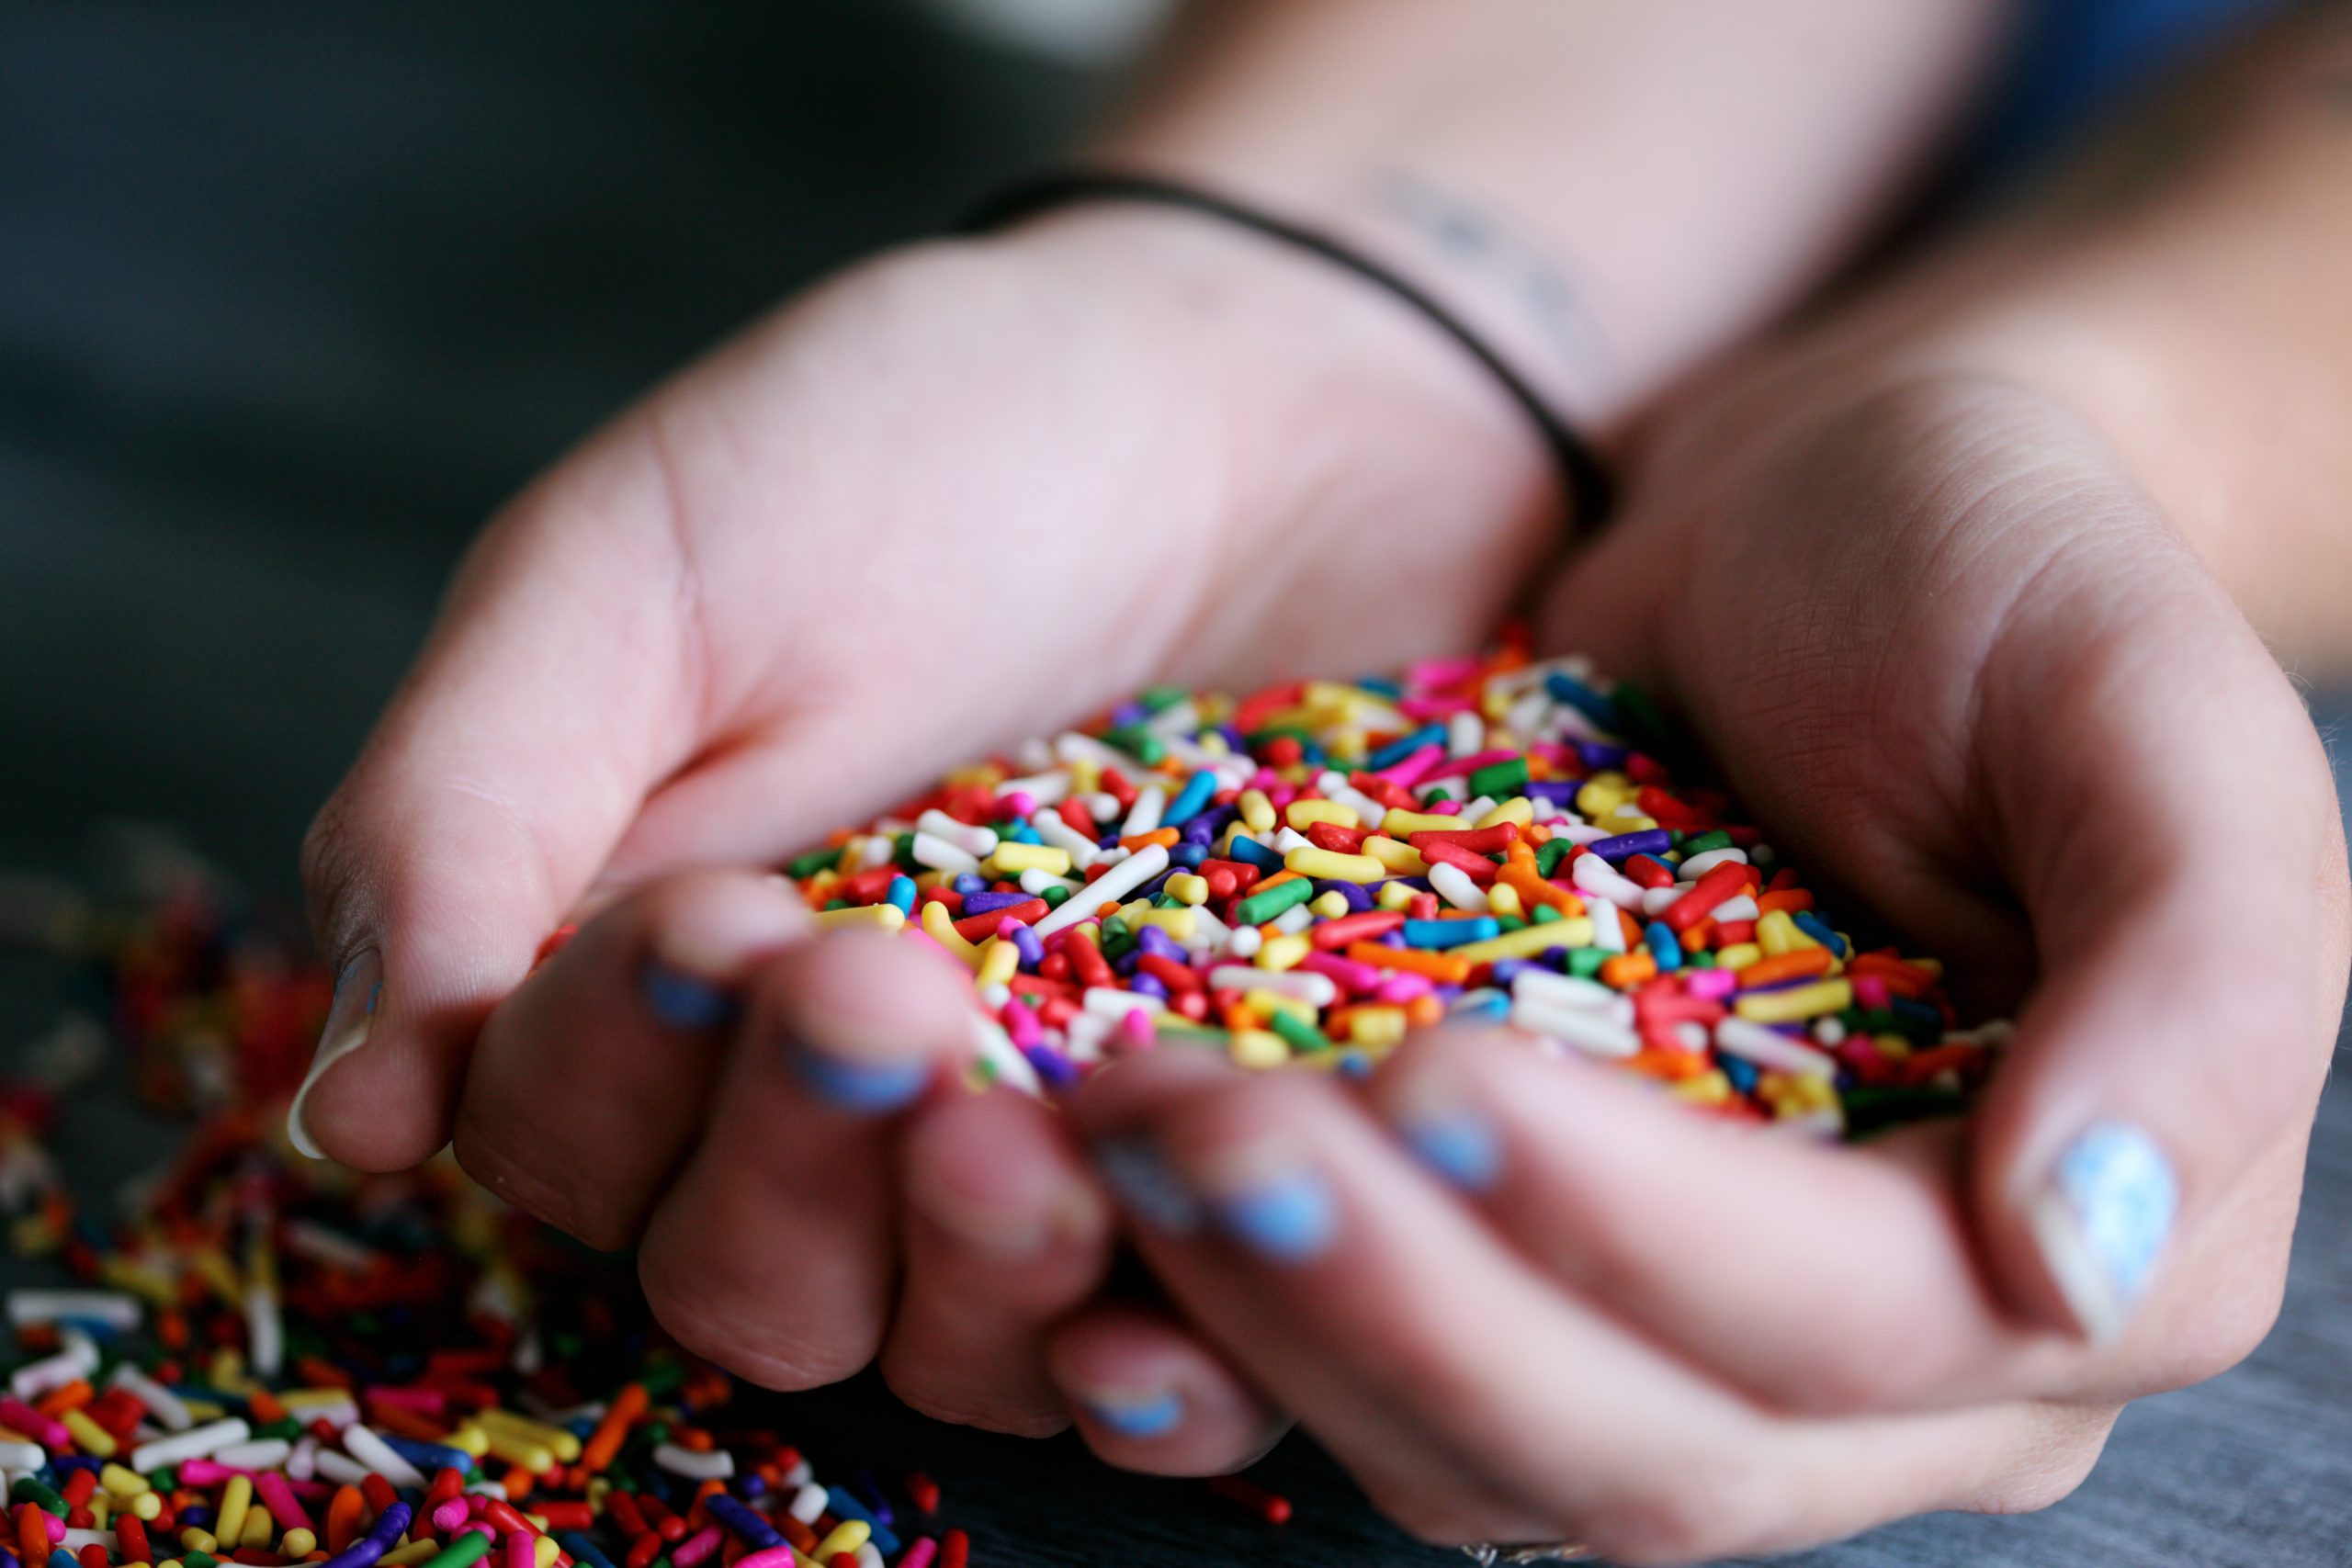 Person Holding Full of Sprinkles by Sharon McCutcheon